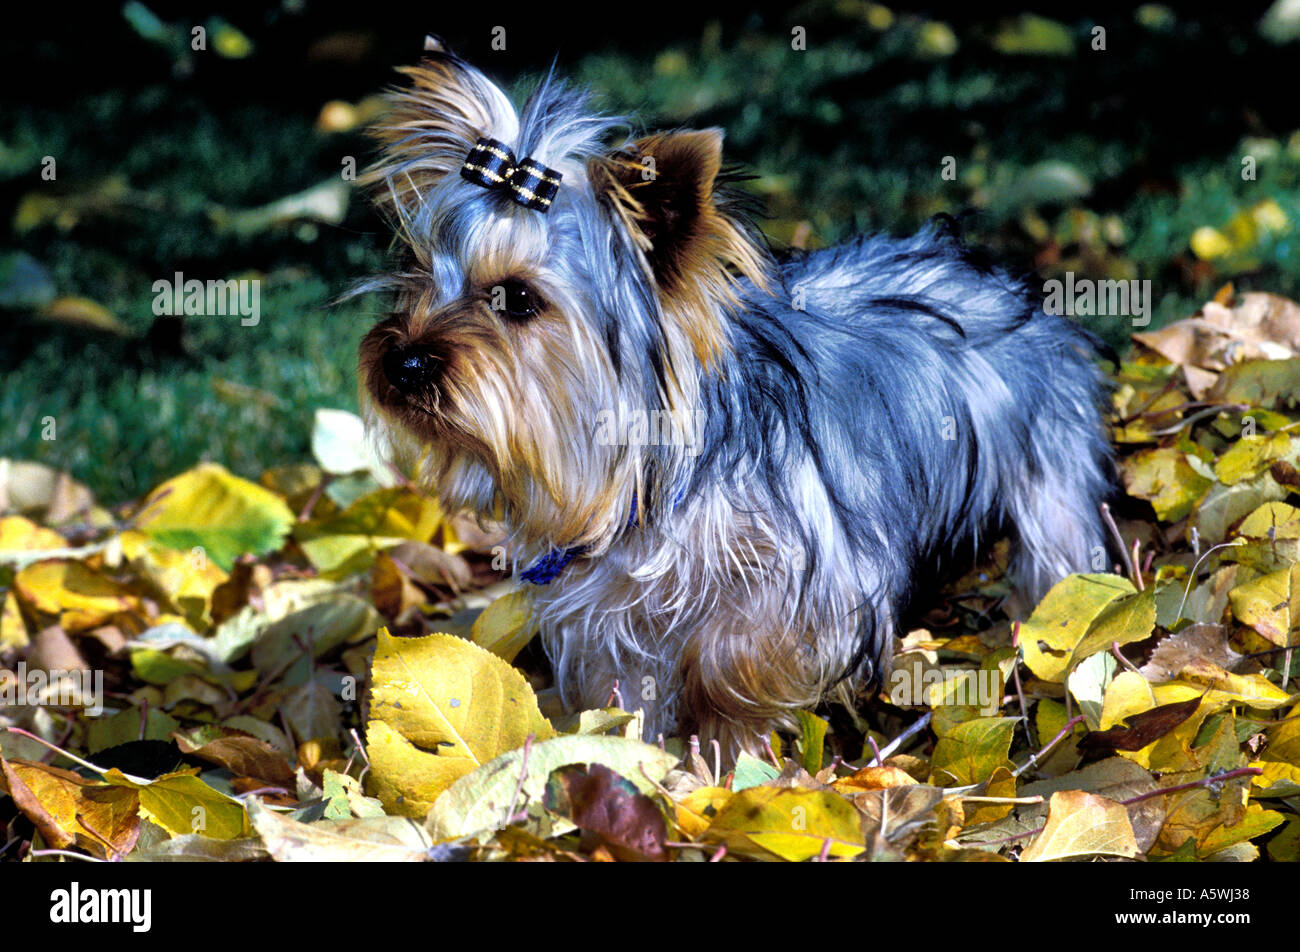 F-15 YORHSHIRE TERRIER PUPPY IN FALL LEAVES Stock Photo